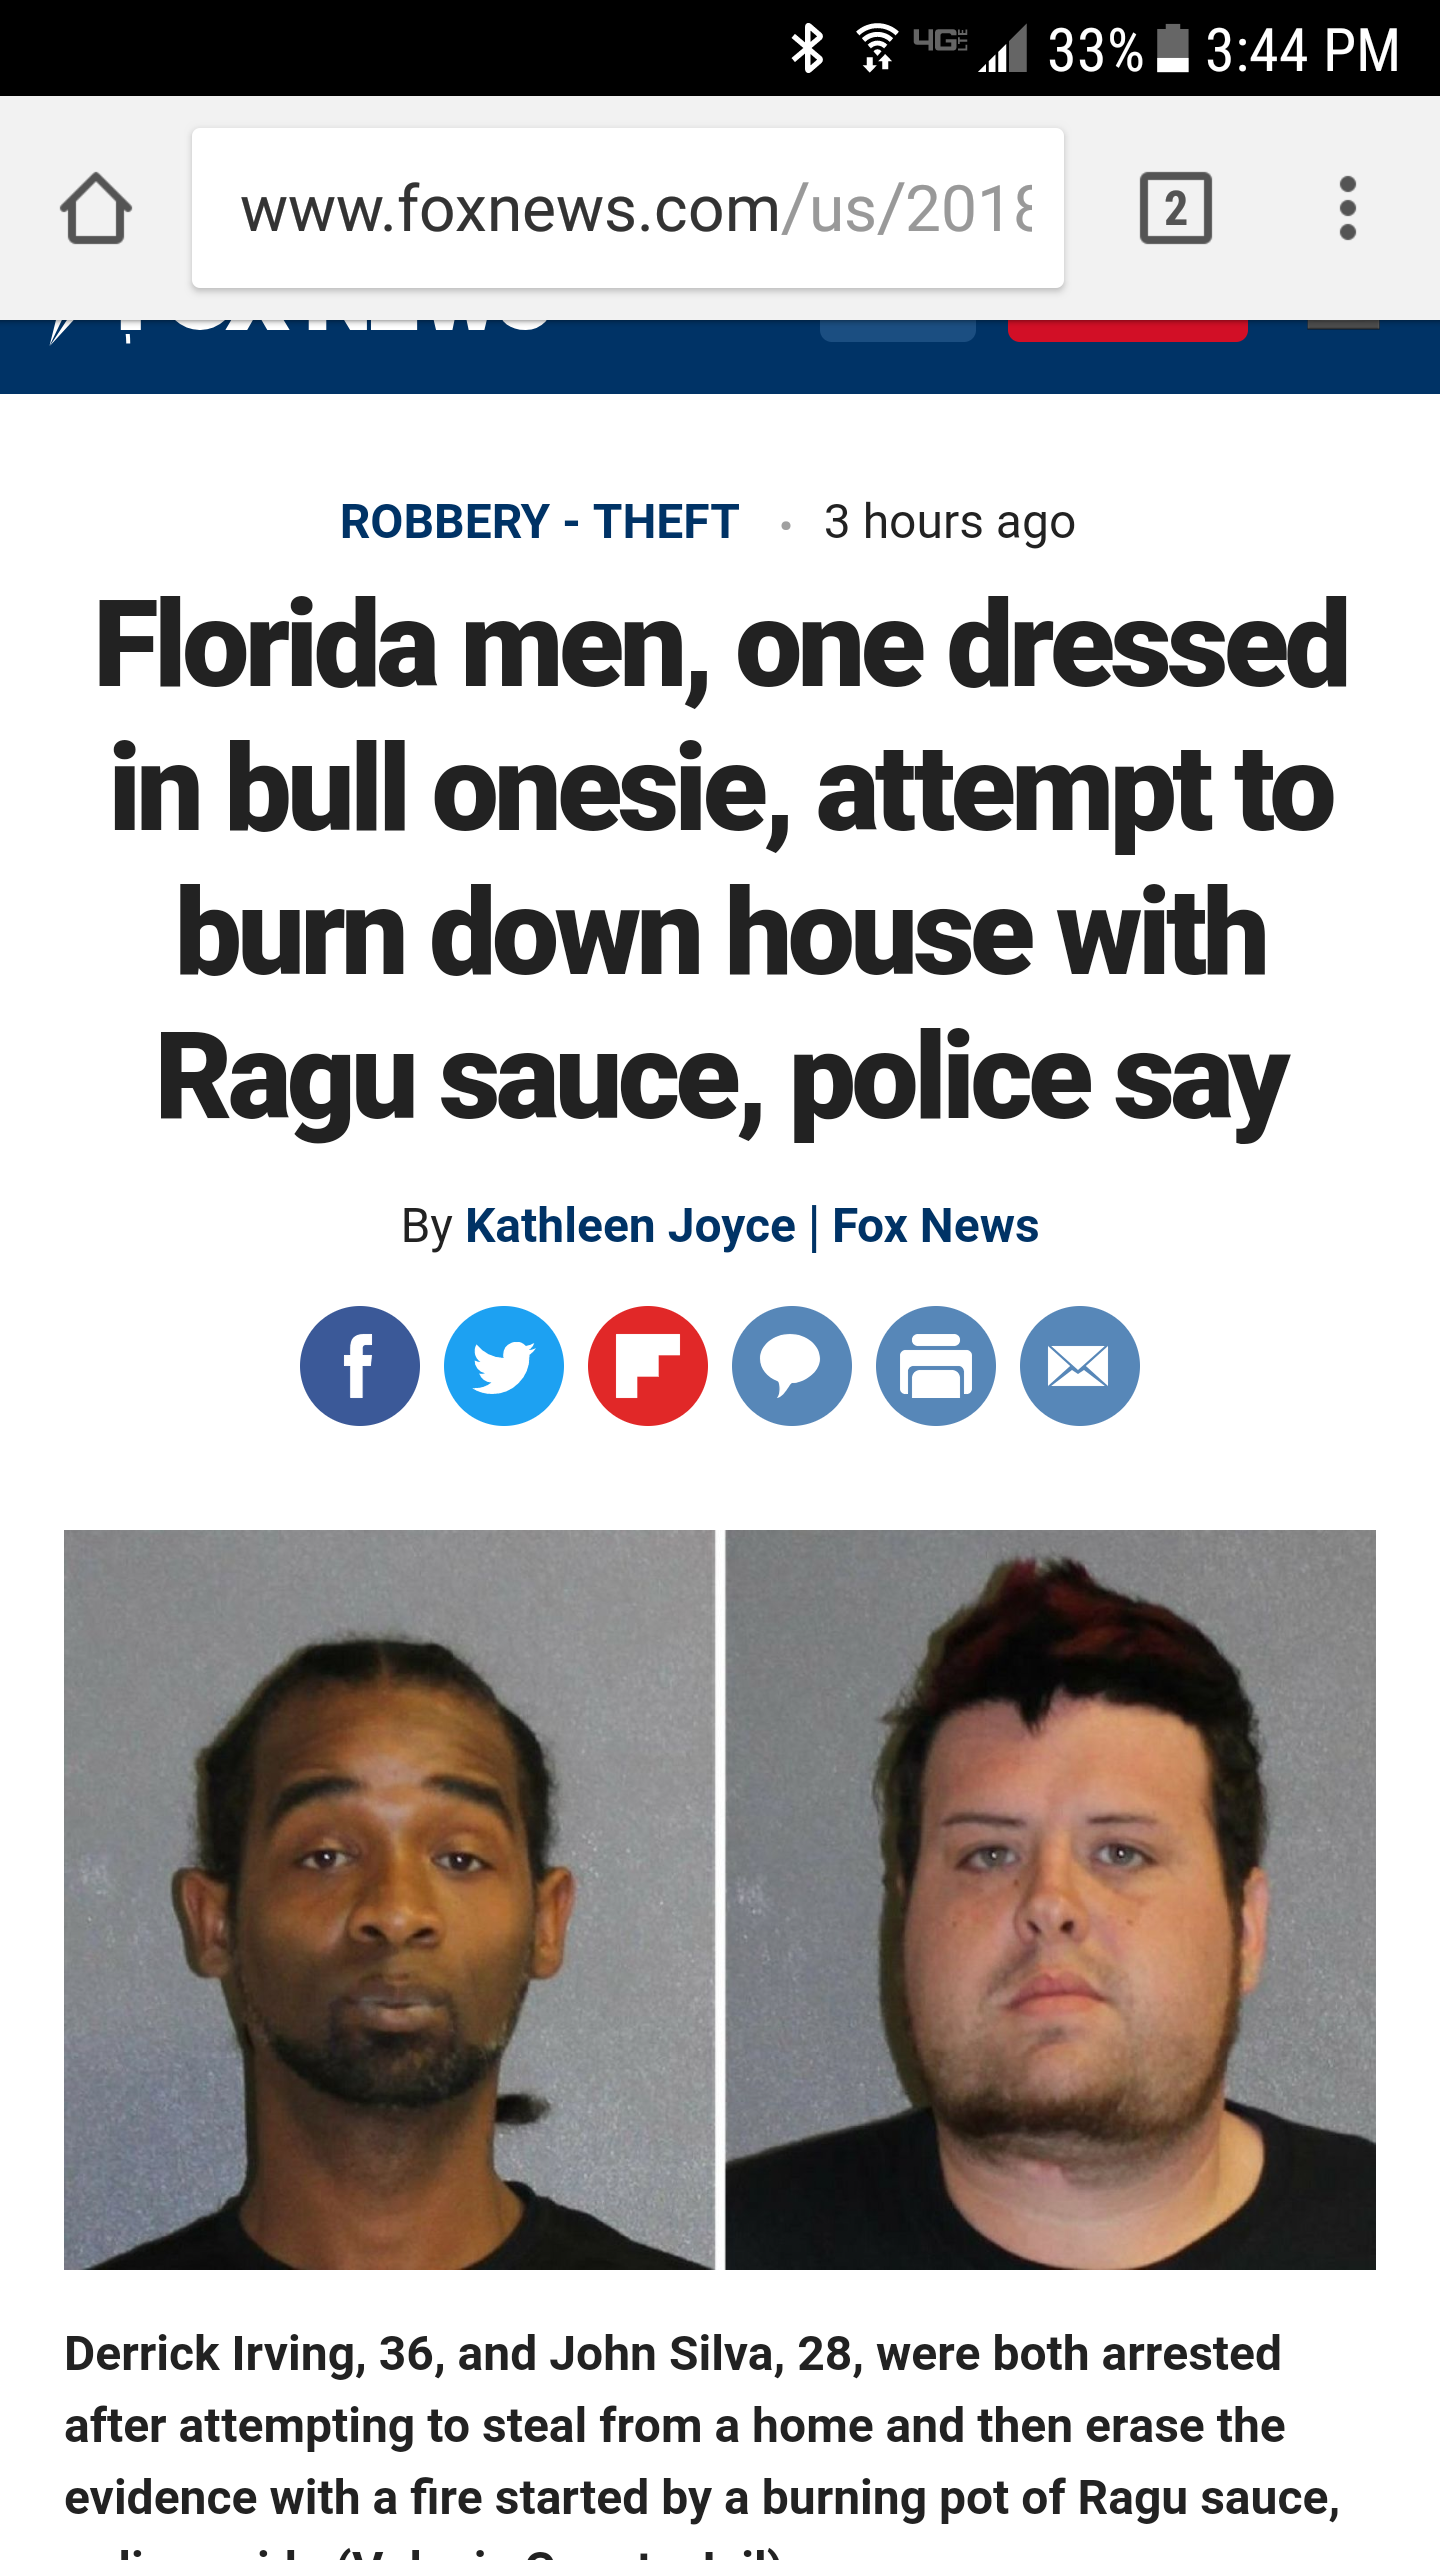 7 WTF Headlines That Can Only Have Come From Florida